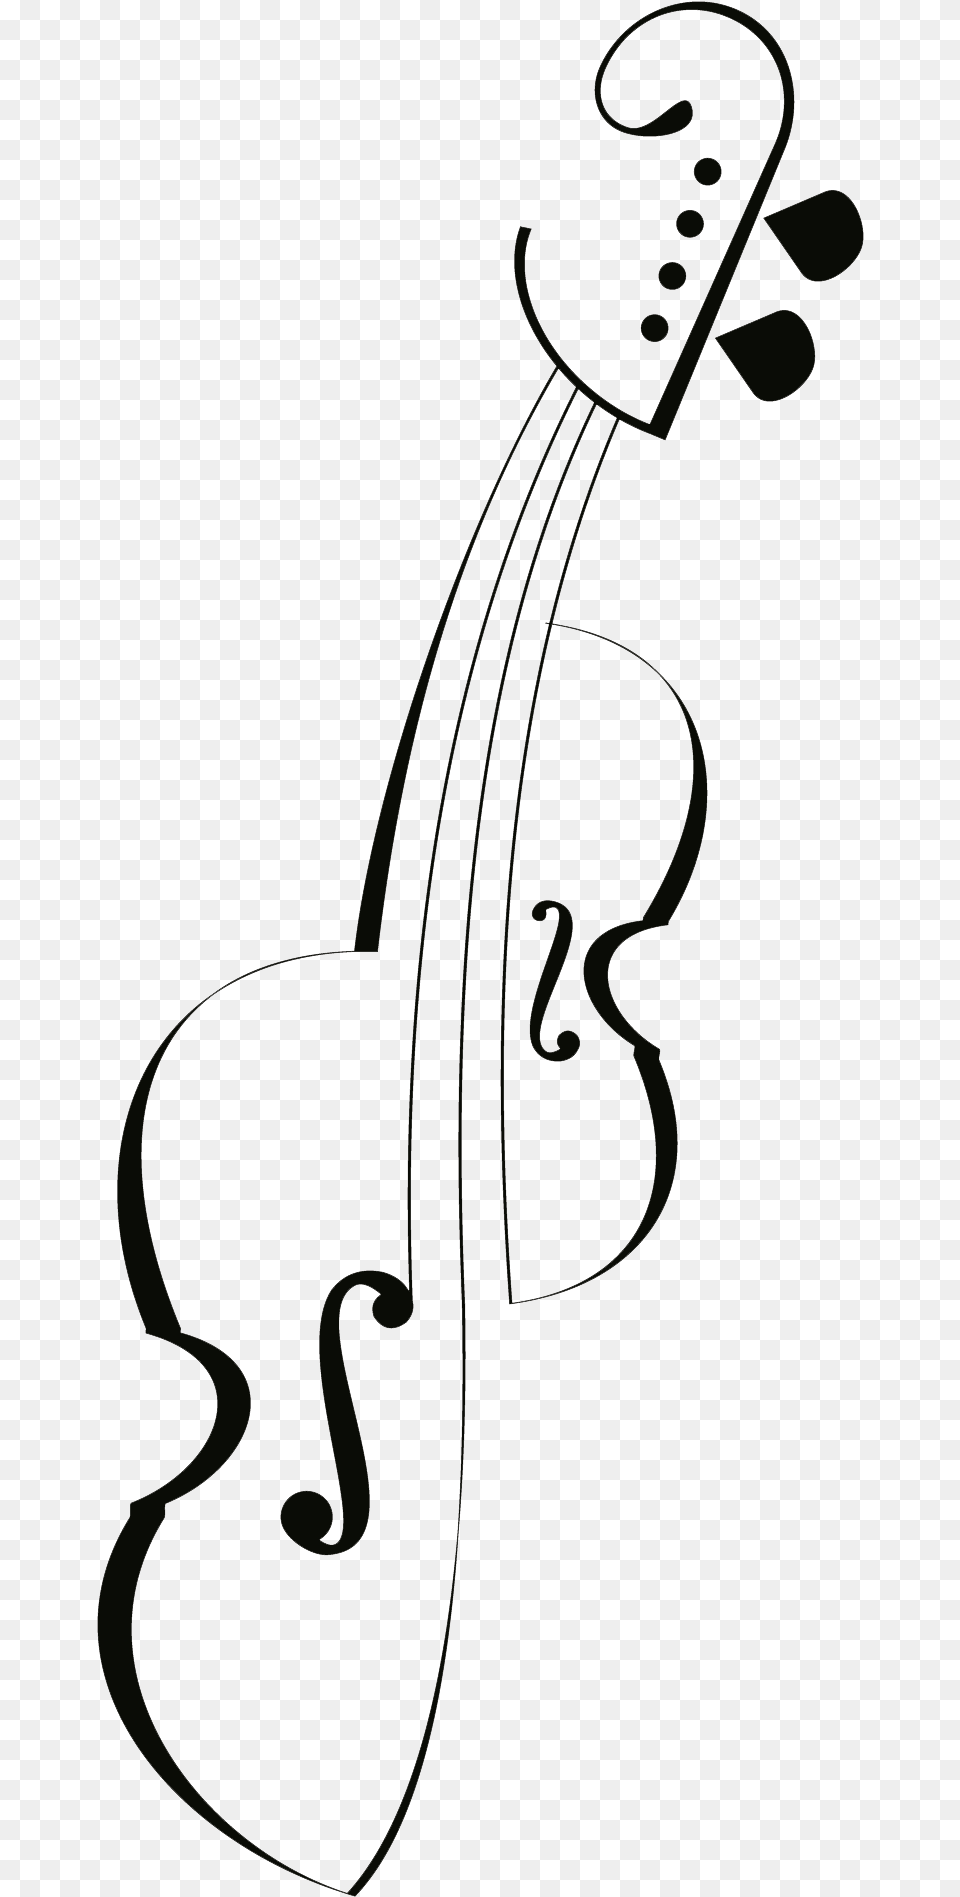 Violin Tattoo Designs Music Tattoo Images Hd, Musical Instrument, Cello Free Transparent Png